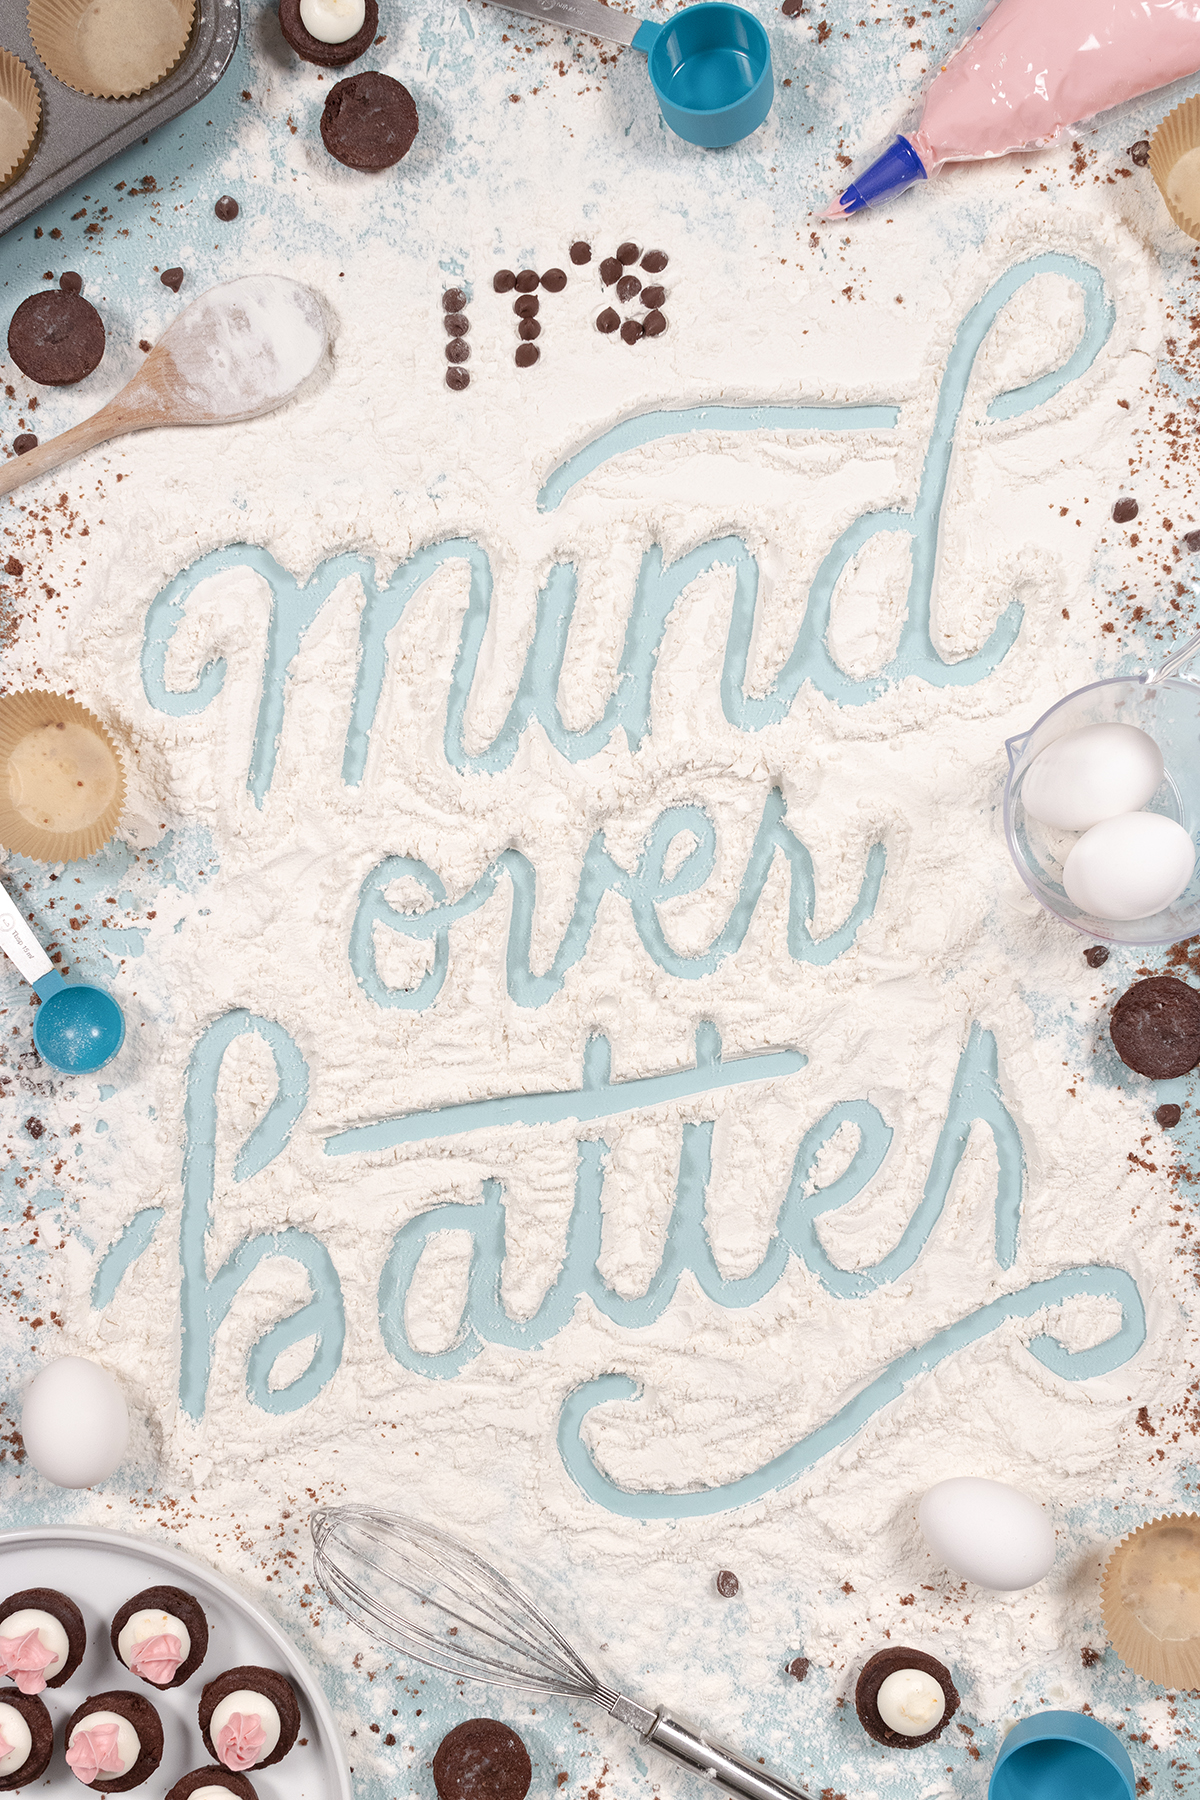 Hand-lettered script carved with a finger into flour, with ingredients and baking tools to make cupcakes designed into the image. Small chocolate cupcakes with pink and white frosting peek into the image. Script reads 'It’s mind over batter.'